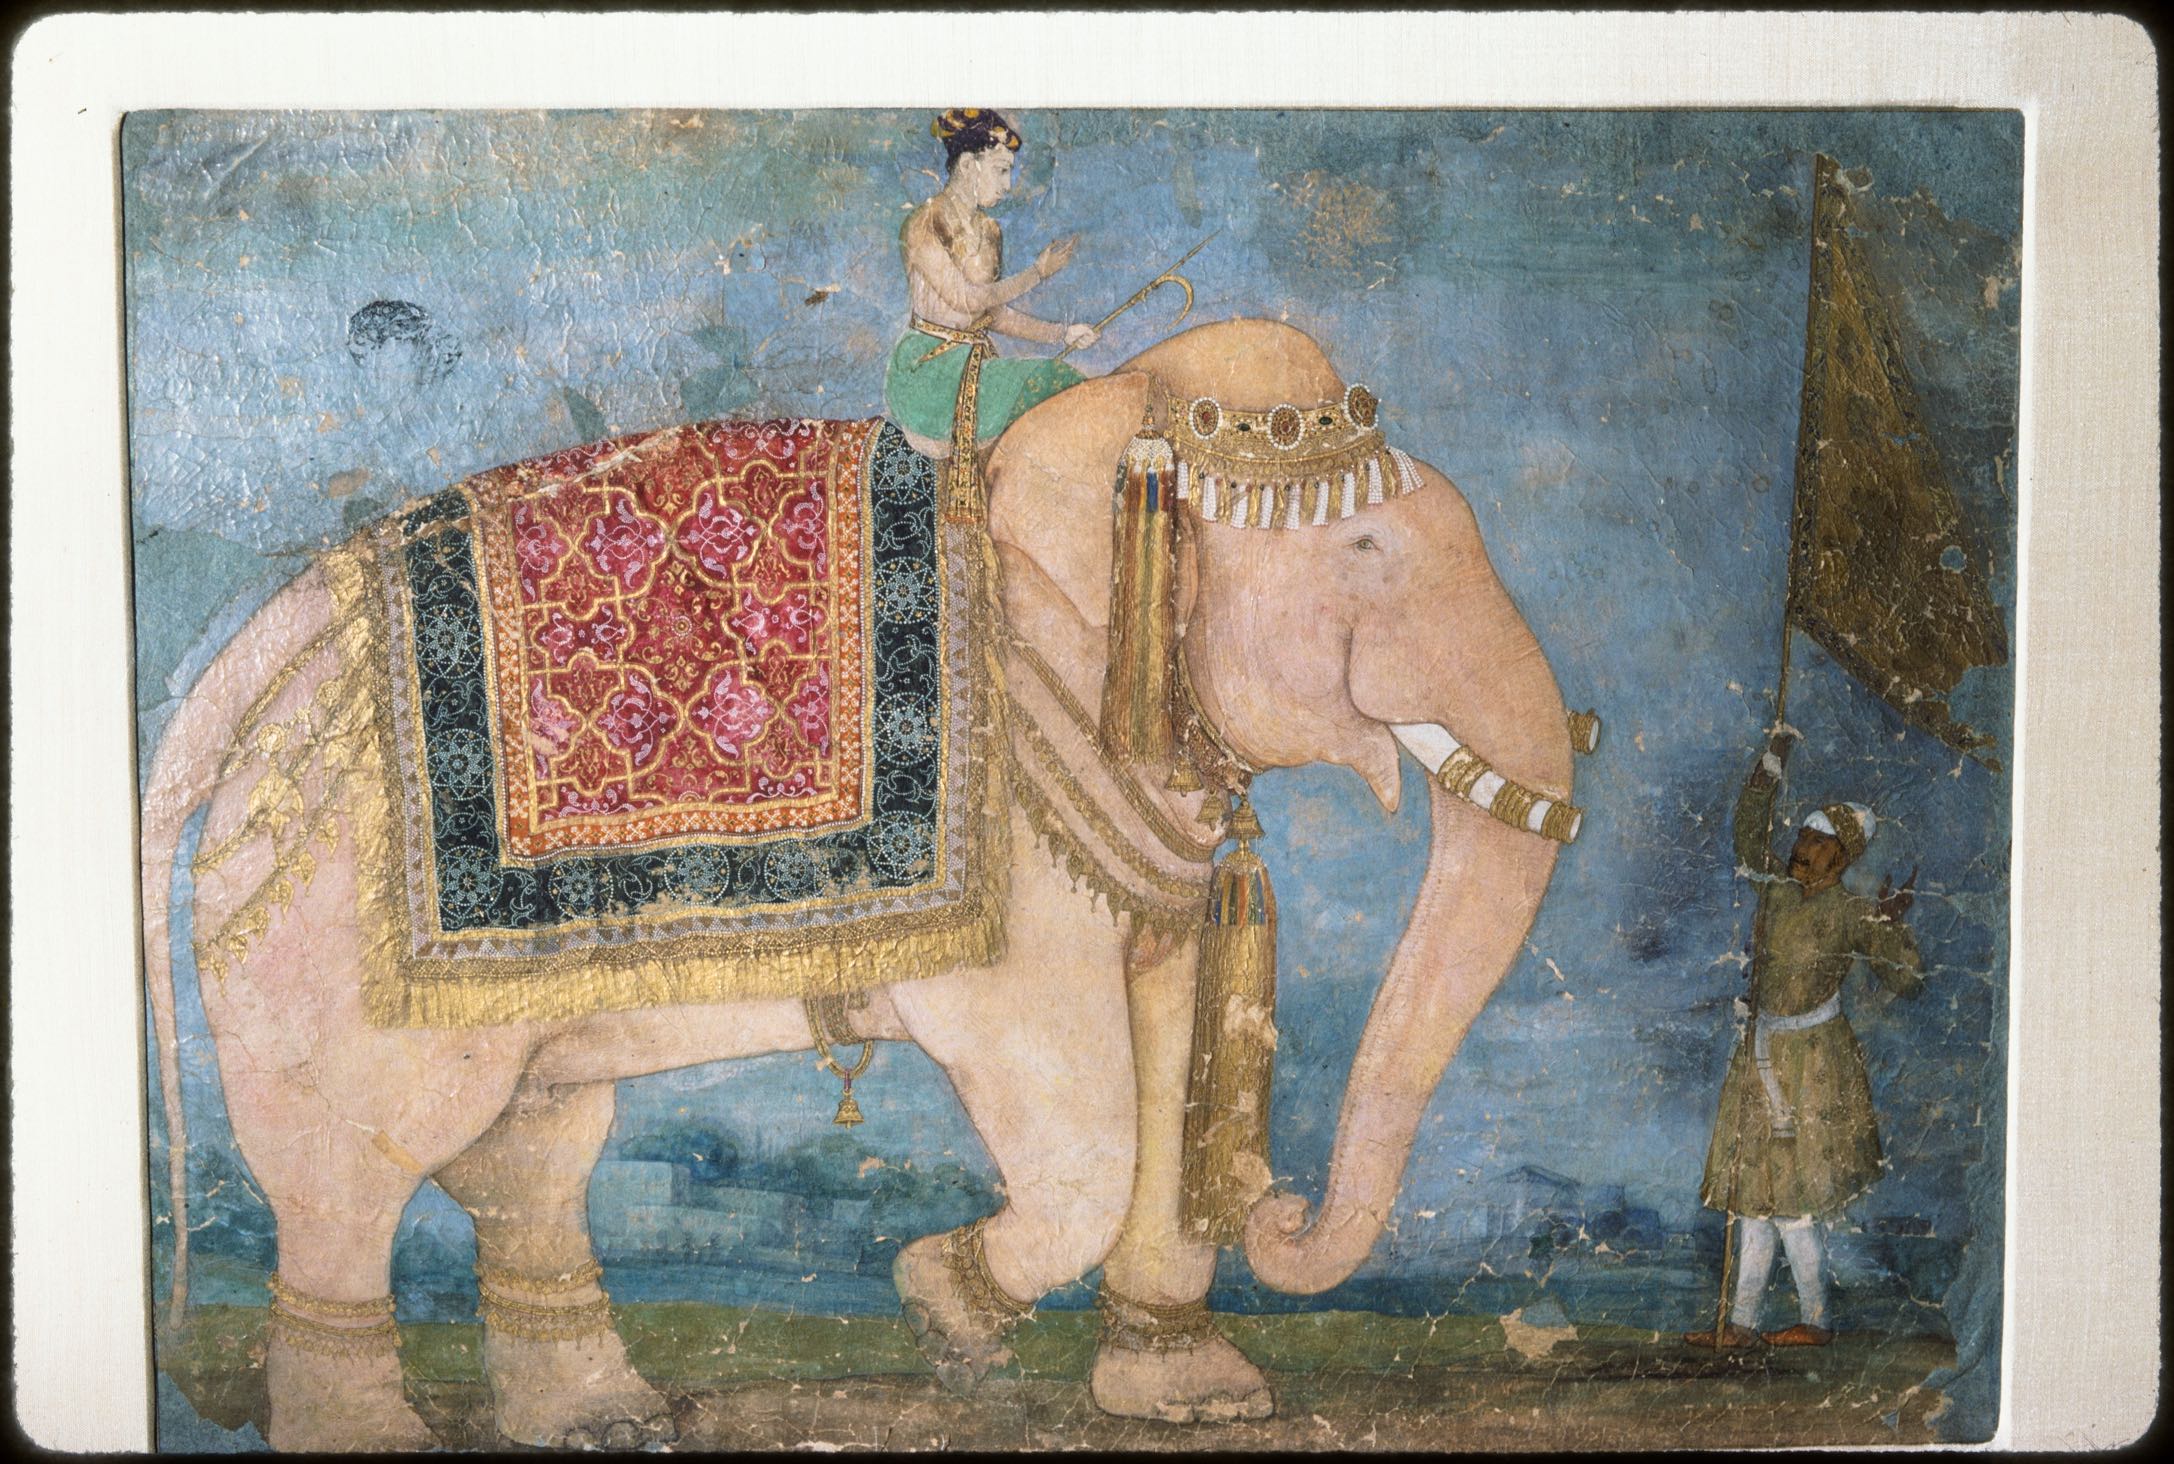 Shah Jahan's pink elephant ridden by Prince Dara Shikoh, page from a royal album of Shah Jahan (Museum of Islamic Art, Qatar, MS.51.2007)